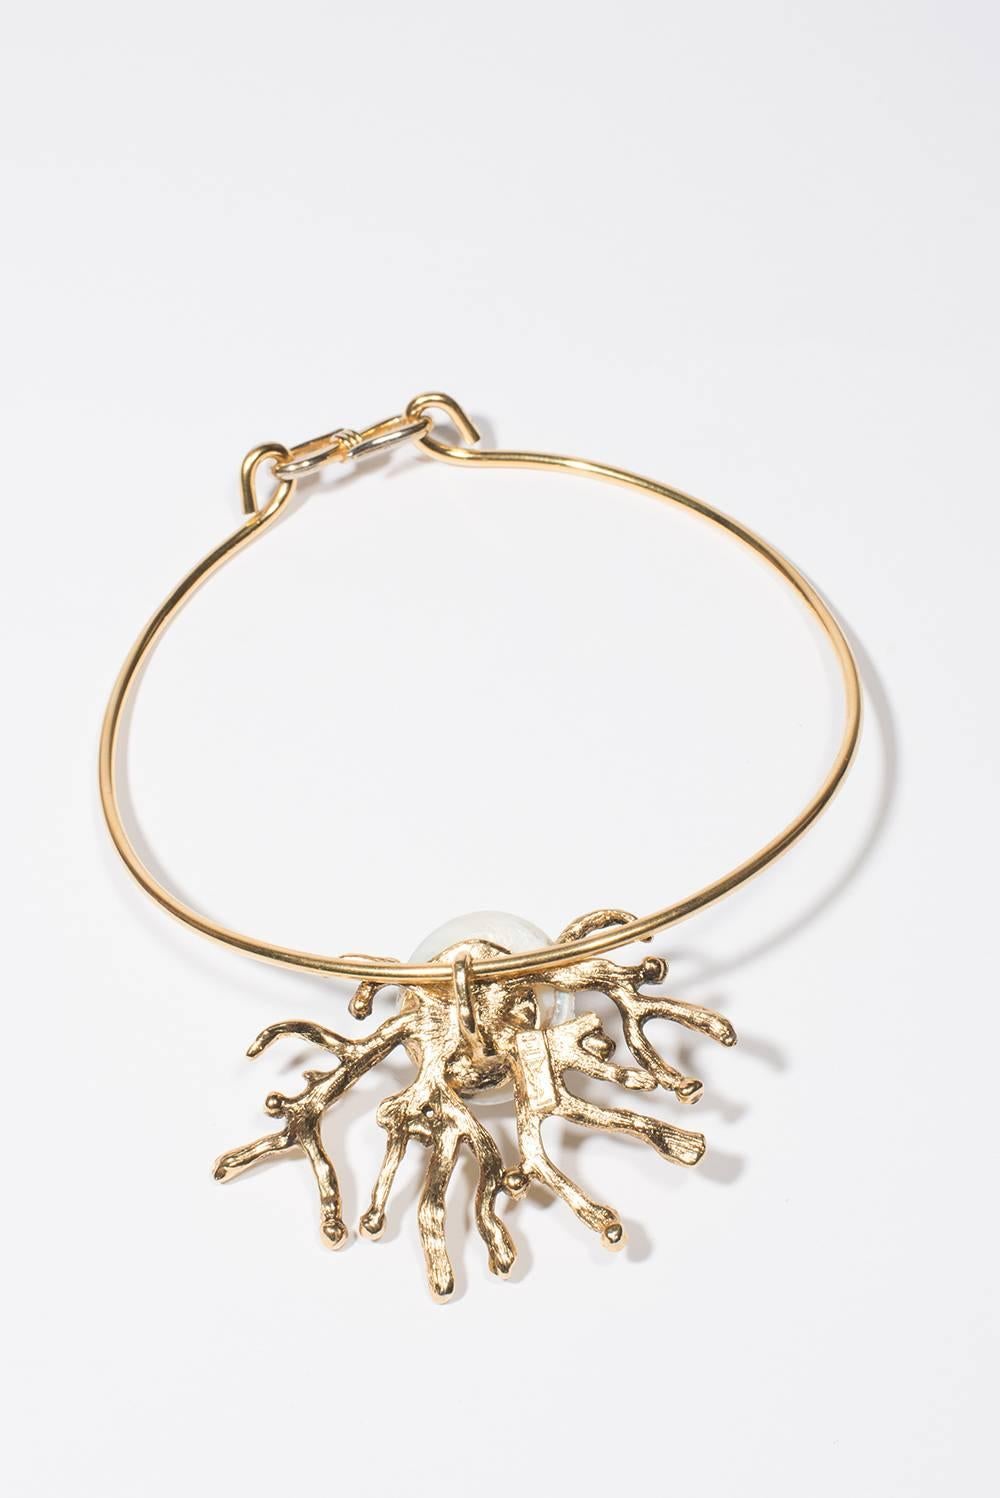 1990 Yves Saint Laurent Iconic Necklace
This magnificent necklace golden brass have in the center the iconic 
coral branch with the shell ( resin) designed by Robert Goossens for 

Yves Saint Laurent 